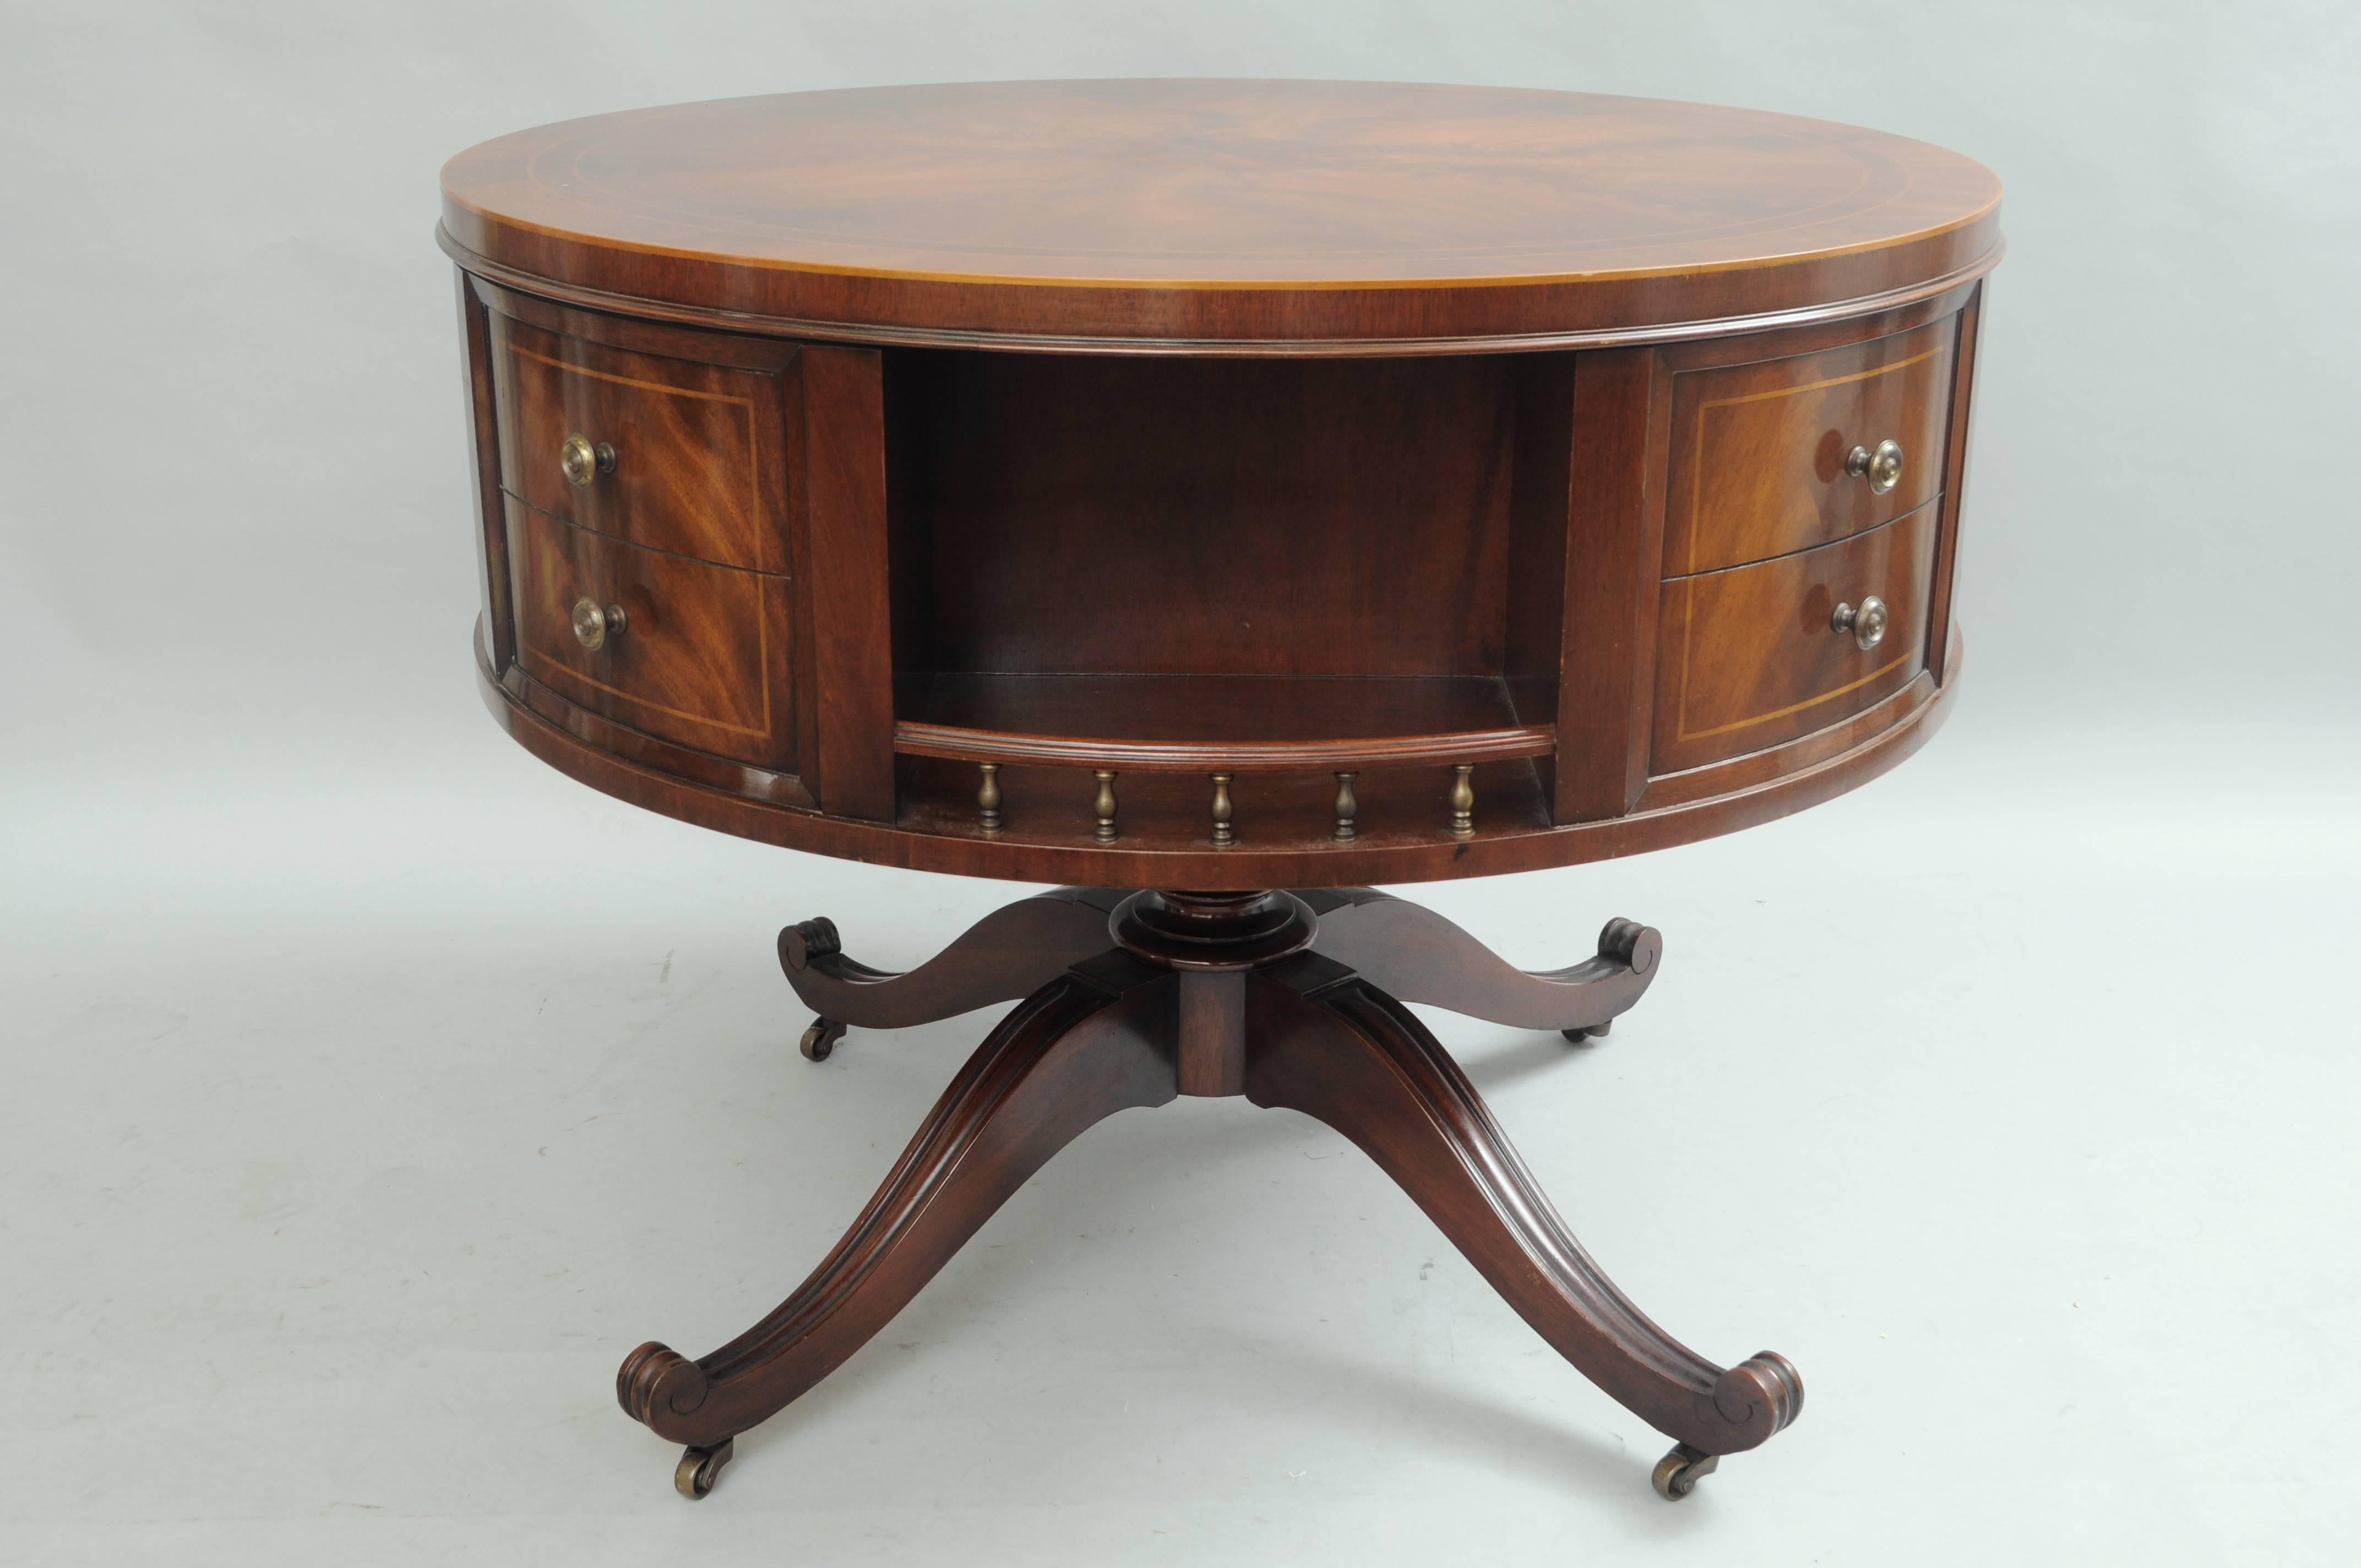 Early 20th century revolving/rotating Regency style mahogany drum/center table. Item features a beautiful sunburst top with banded and inlaid detailing, brass pulls, faux drawers, spinning center with cubby storage, pedestal base and rolling